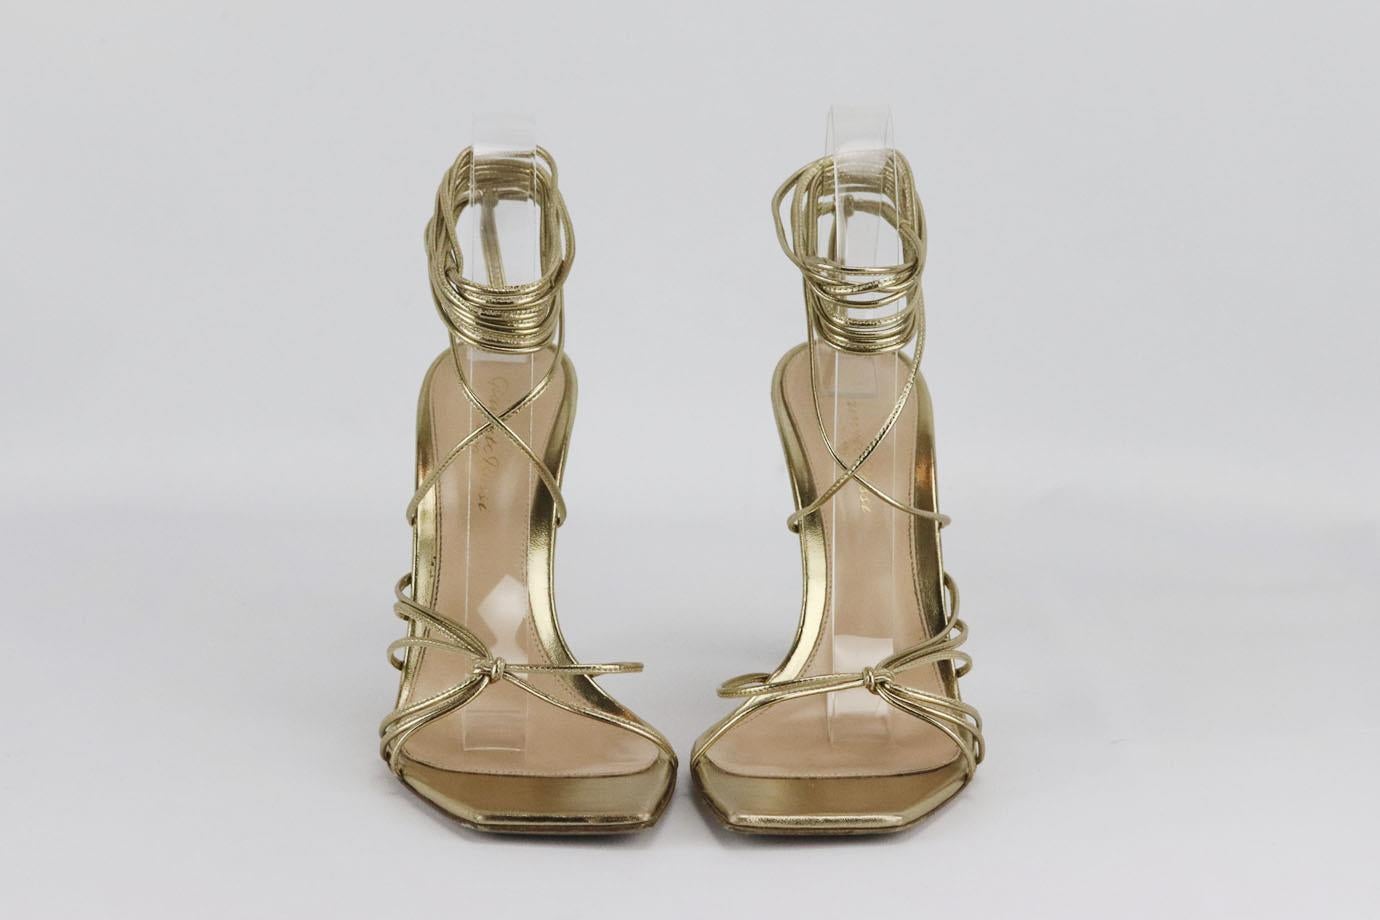 Gianvito Rossi lace up leather sandals. Gold. Lace up fastening at side. Comes with dustbag. Size: EU 39.5 (UK 6.5, US 9.5). Insole: 9.5 in. Heel: 3.5 in Very good condition - Some wear to soles. Light wear to upper material; see pictures.
